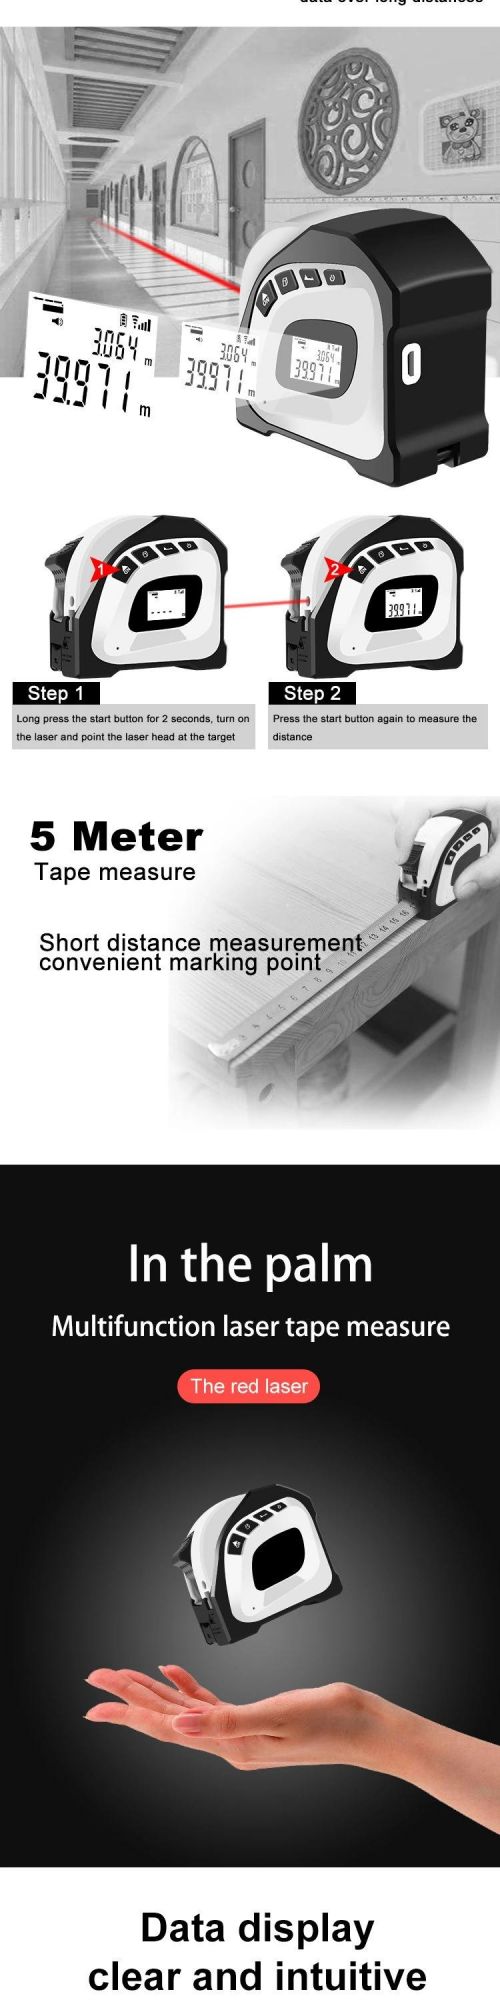 2 in 1 40m+5m Digital Laser Distance Meter with Tape